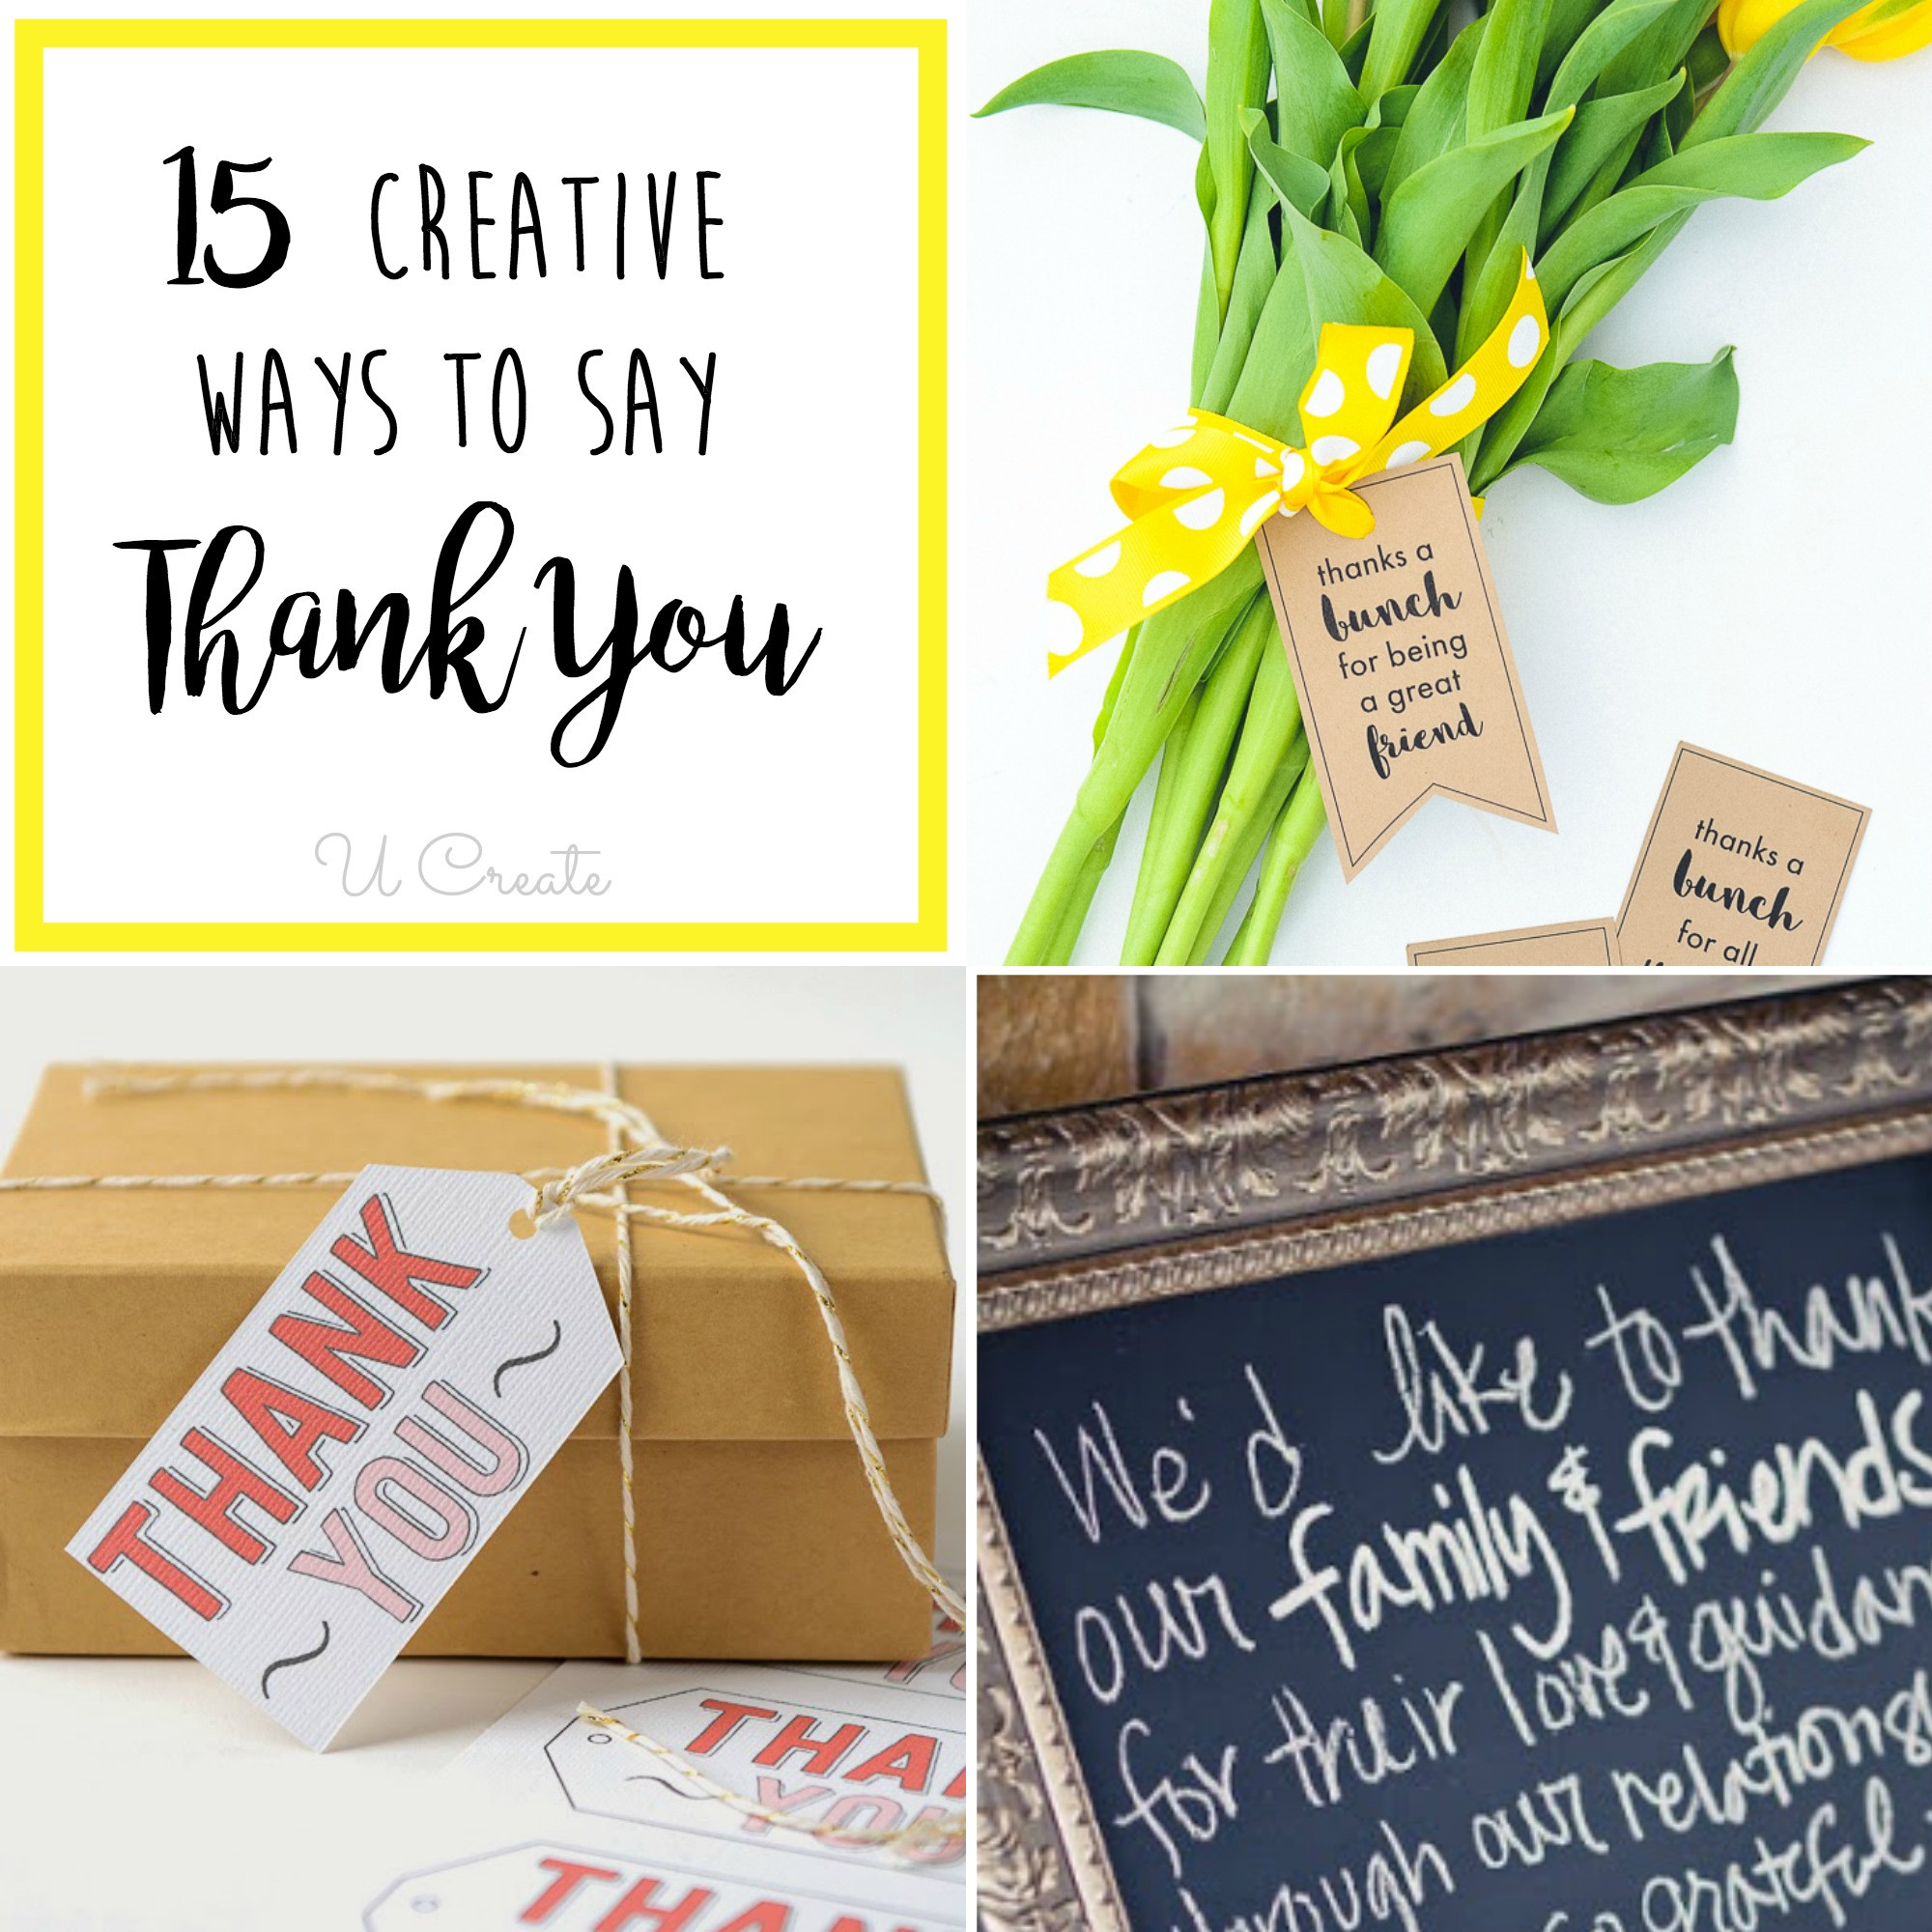 Special Thank You Gift Ideas
 15 Creative Ways to Say Thank You